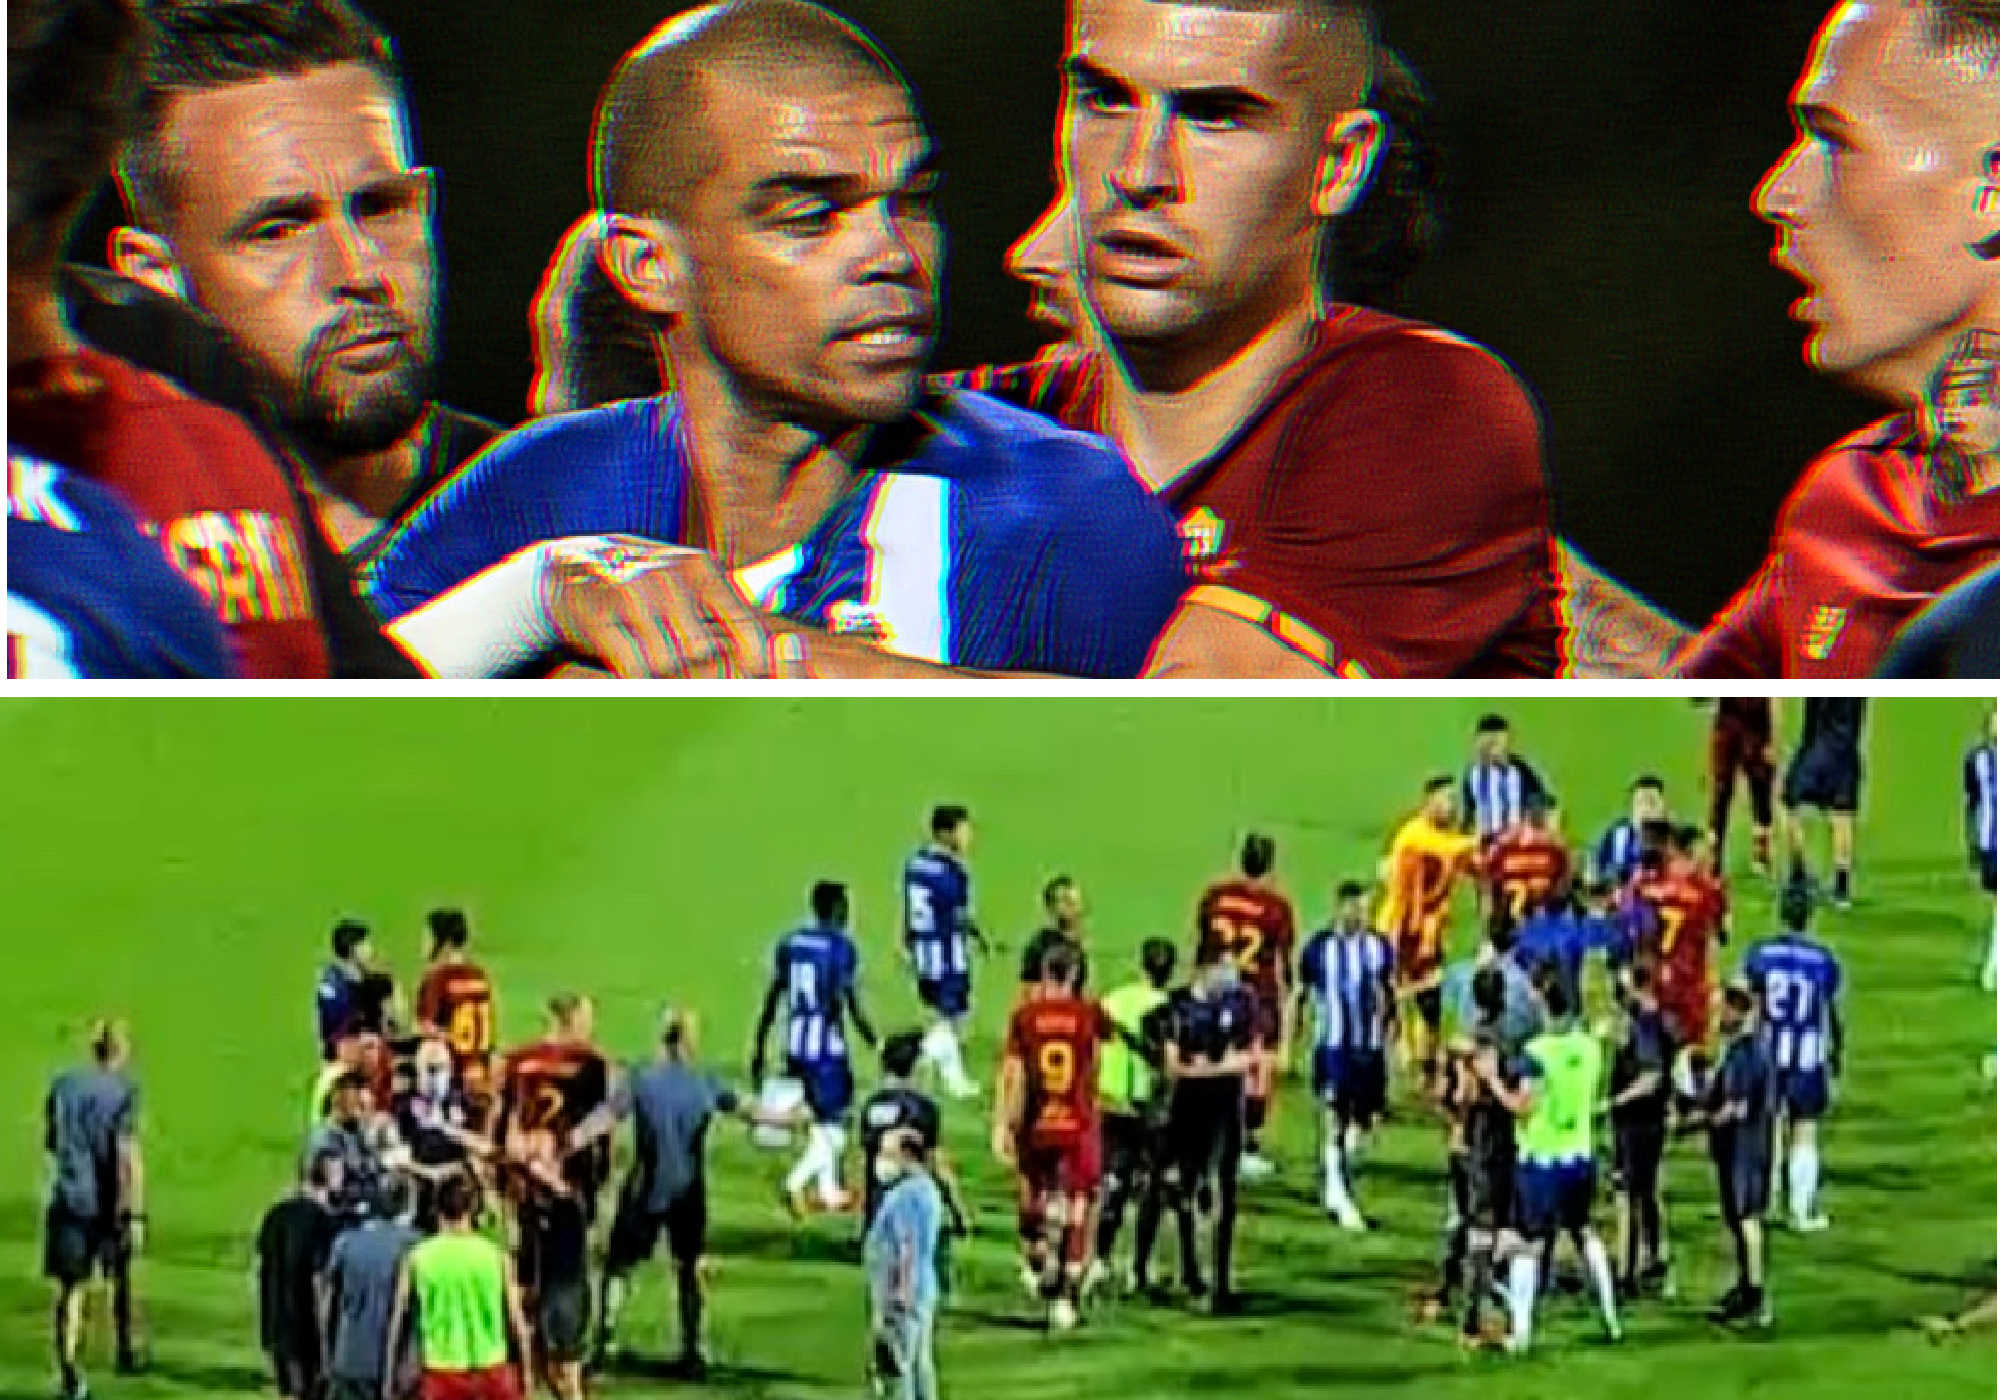 Pepe sparks a mass brawl with his challenge on Mkhitaryan during pre-season clash between Roma and Porto